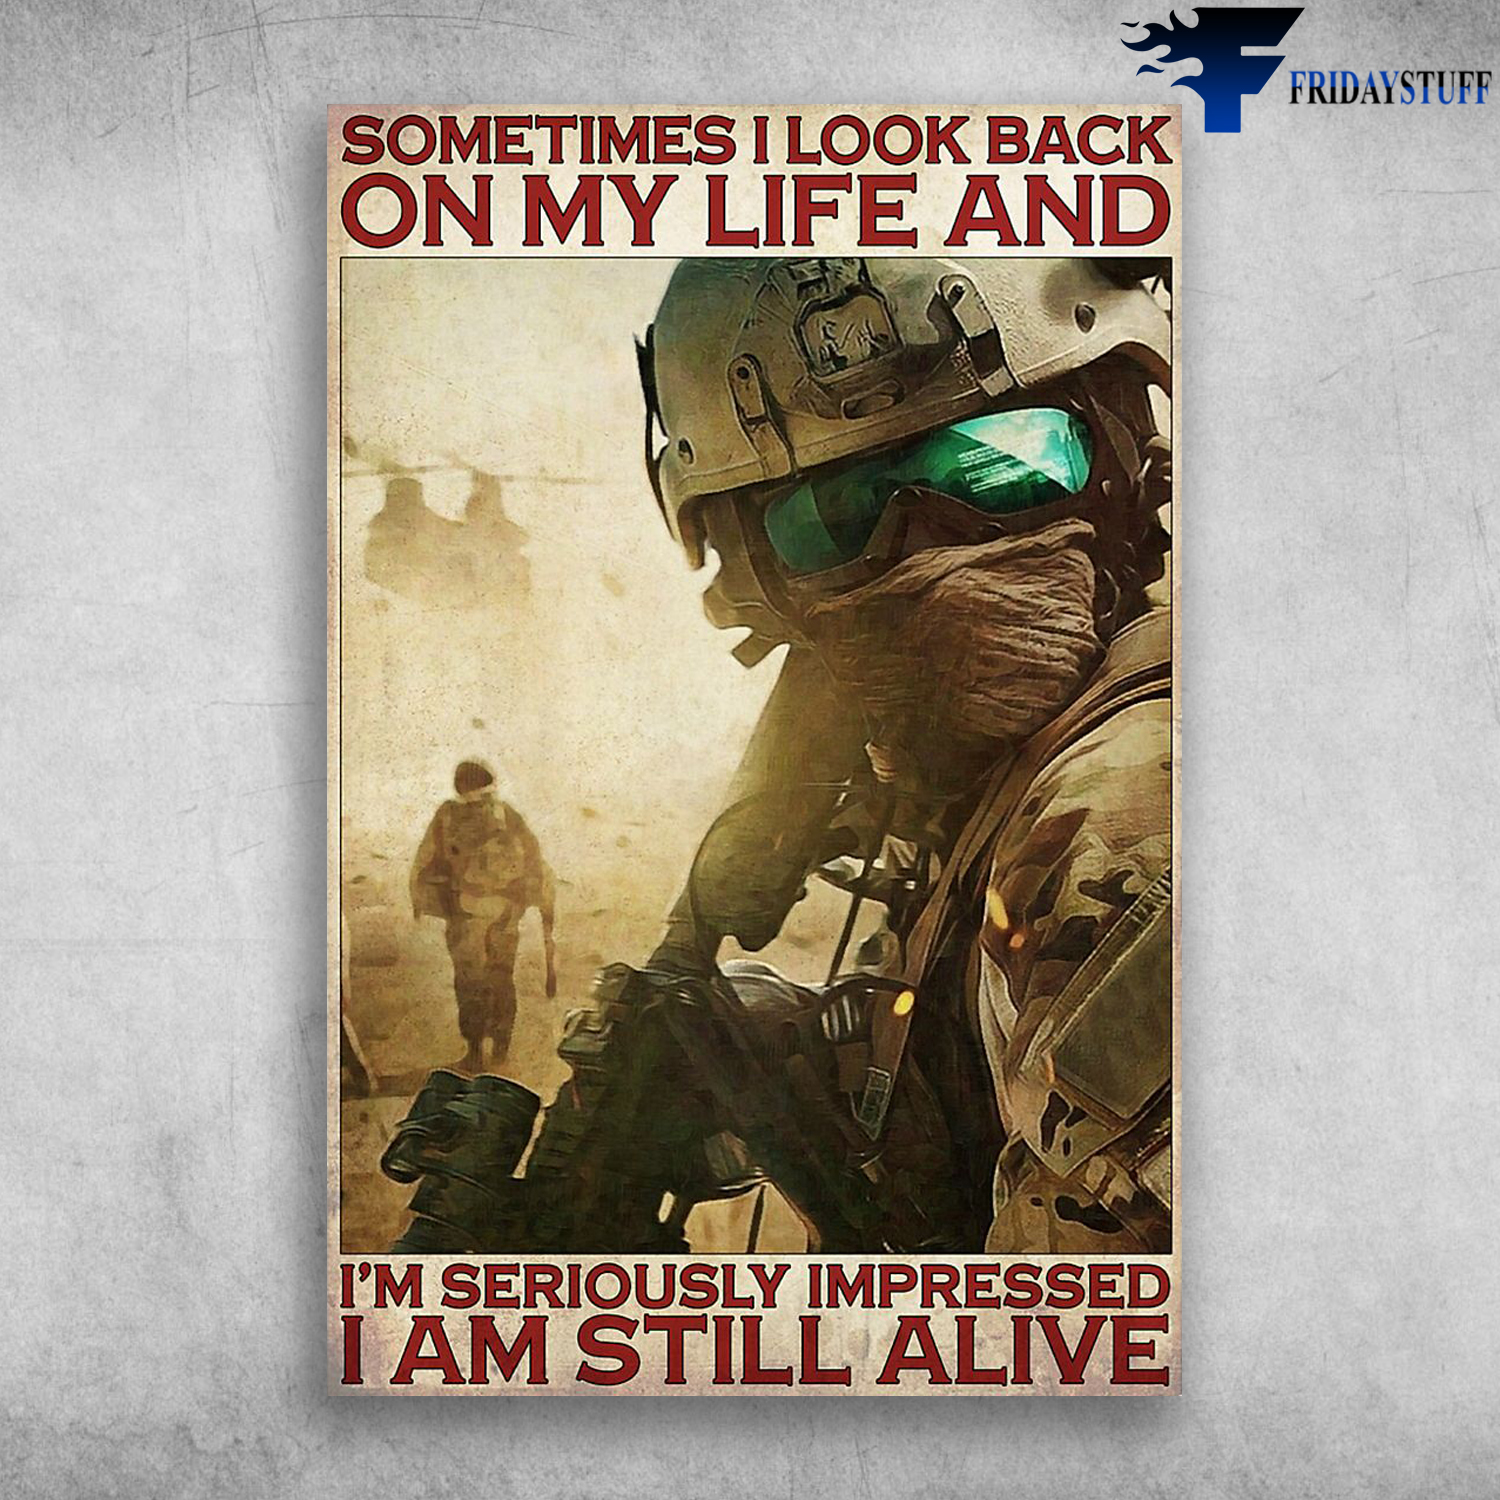 Soldier On The Battlefield - Sometimes I Look Back On My Life And I'm Seriously Impressed I Am Still Alive